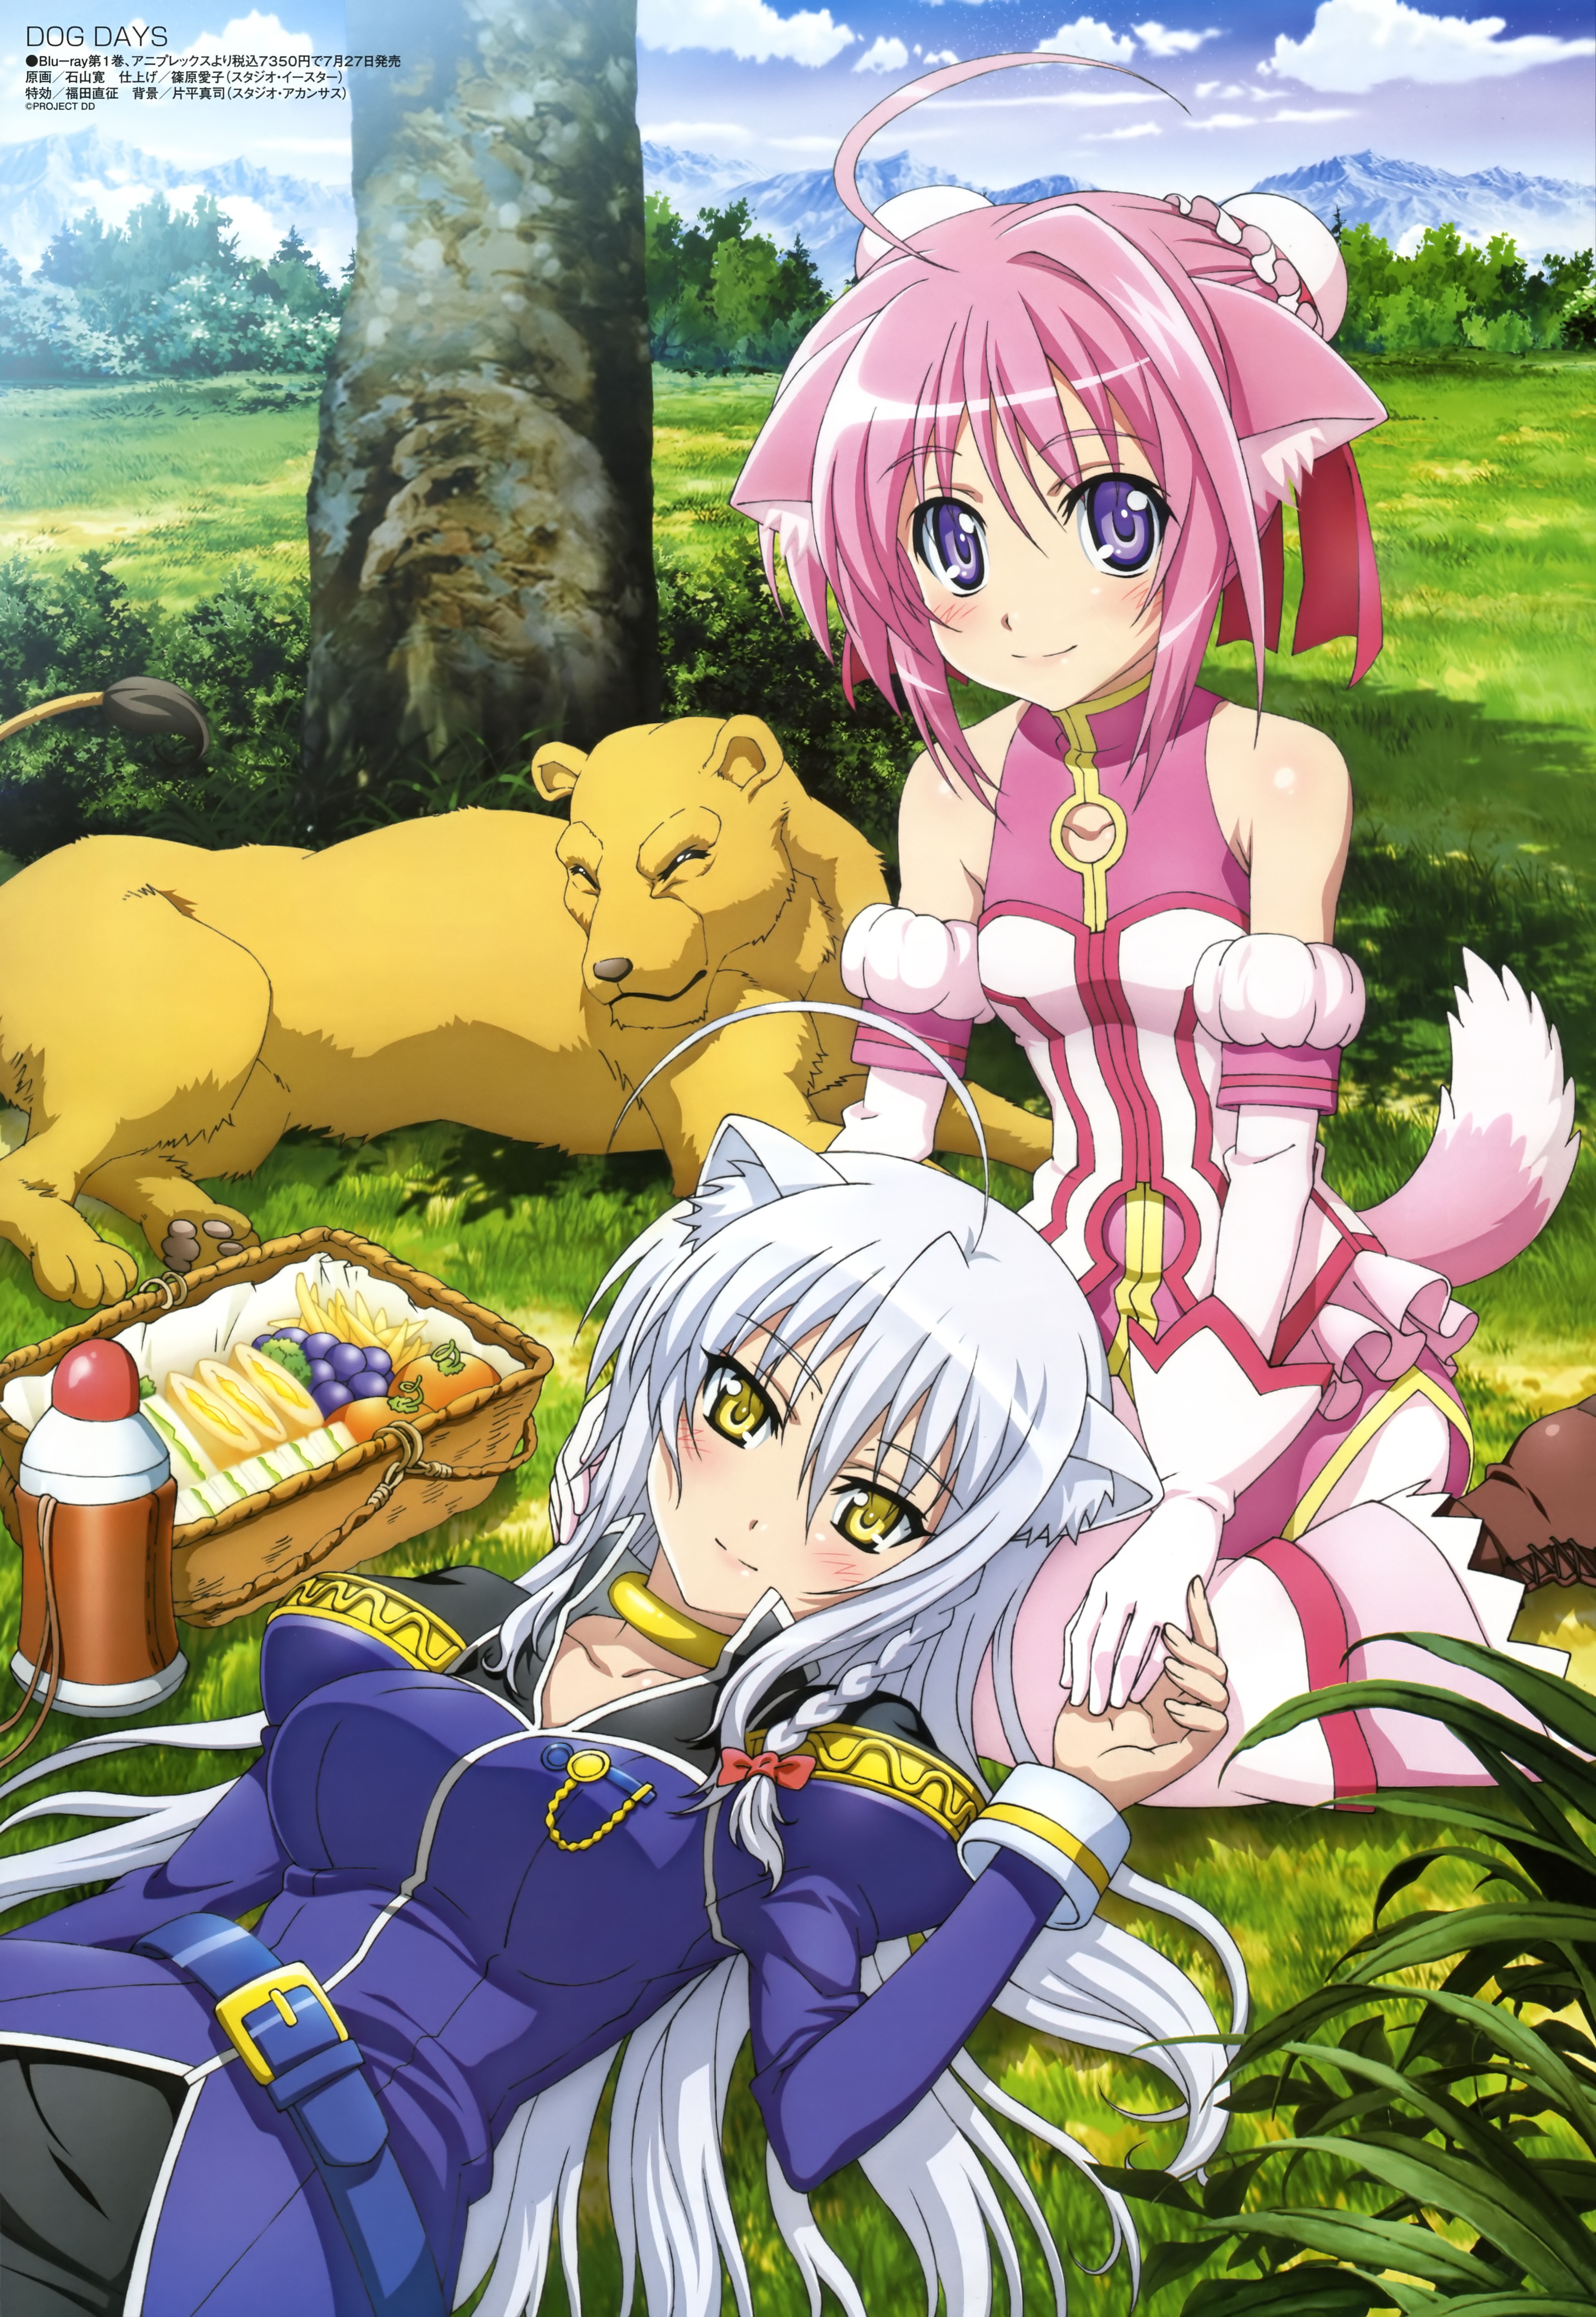 Download Anime Dogs Day S1